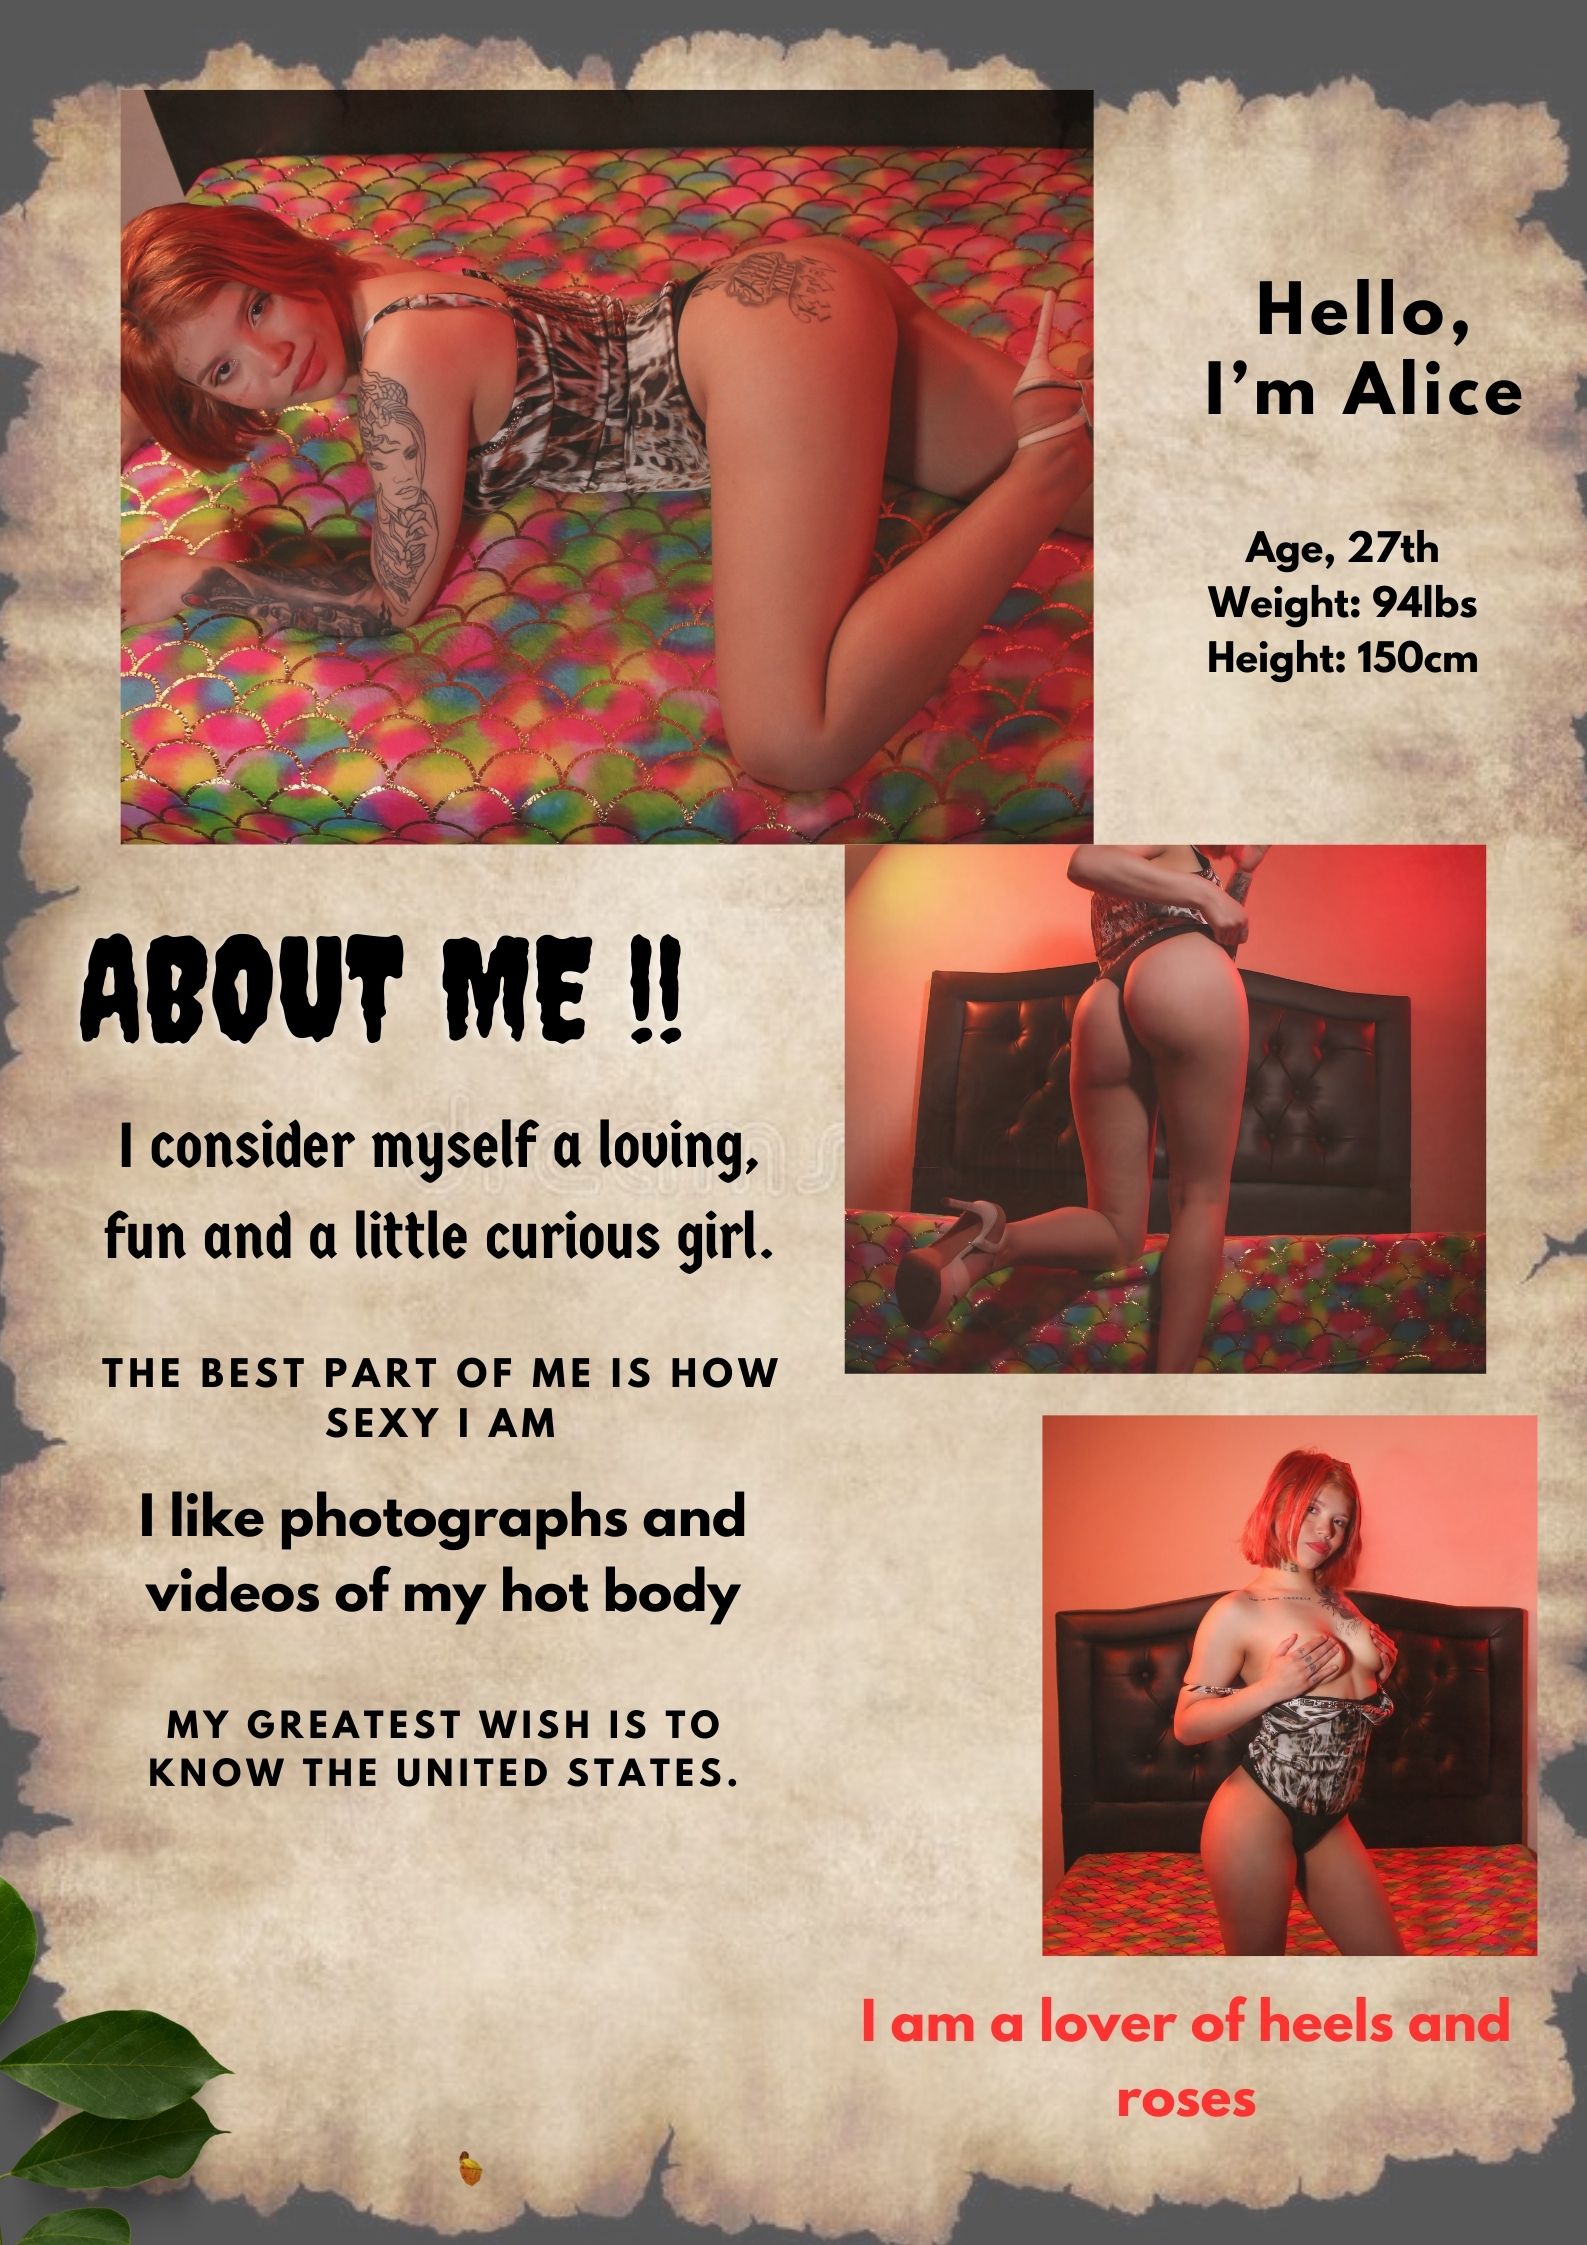 AliceJulieth about me! image: 1